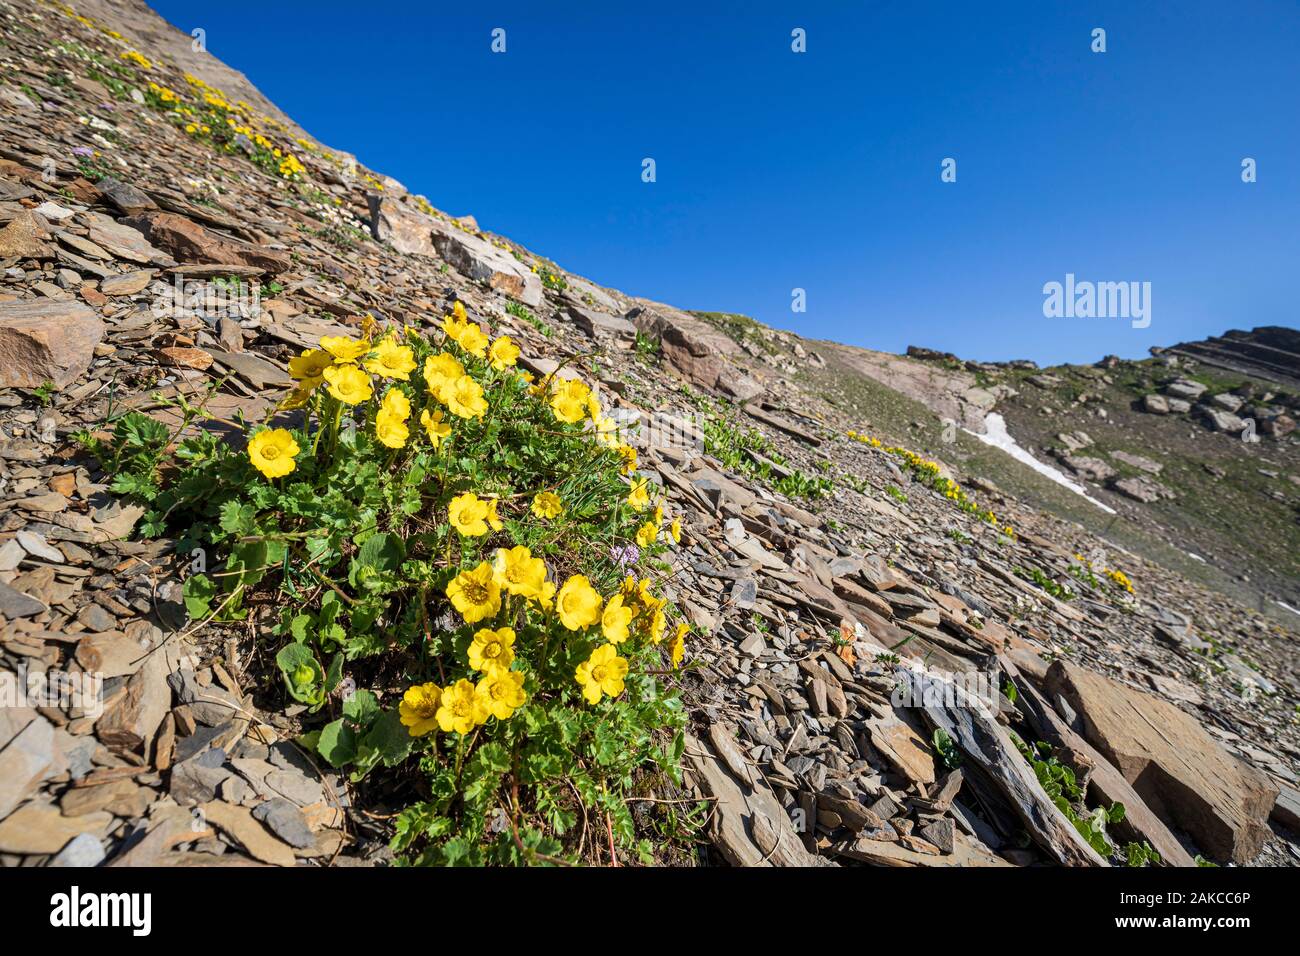 France, Hautes Alpes, Ecrins National Park, Orcieres Merlette, Natural Reserve of the Circus of Grand Lac des Estaris, the Creeping Avens (Geum reptans) in a scree at 2793 m altitude Stock Photo